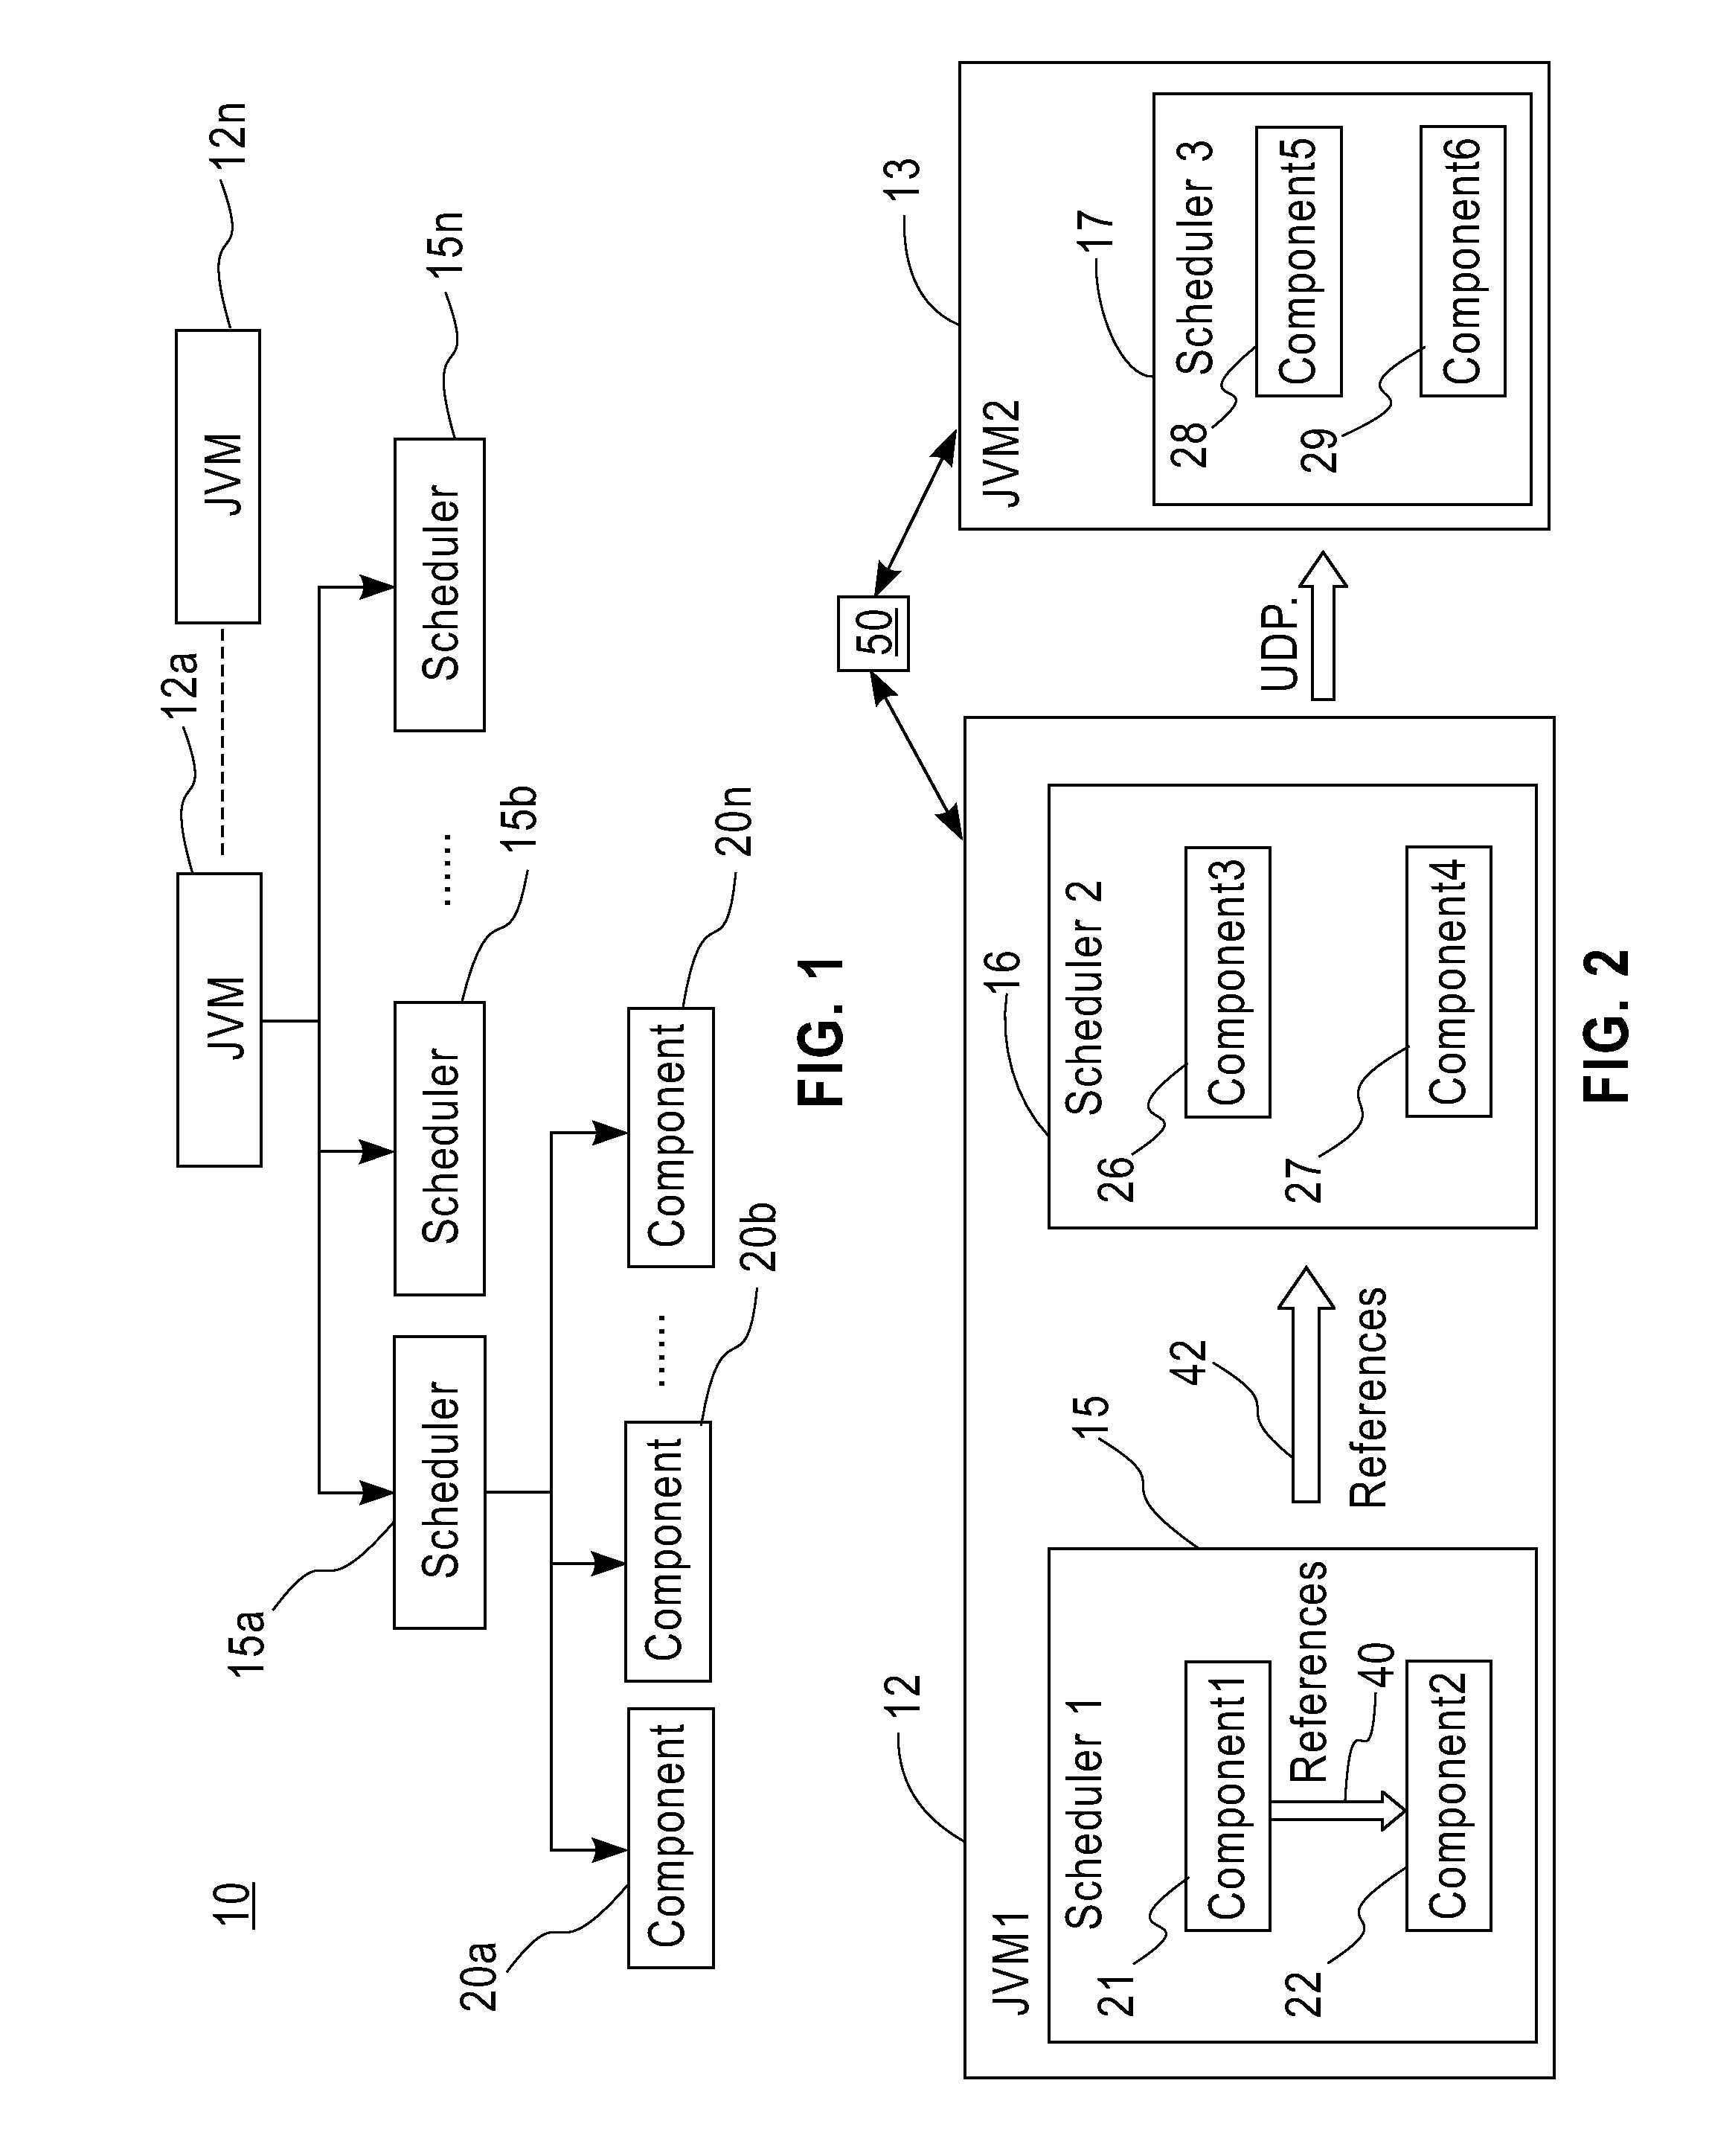 Distributed, fault-tolerant and highly available computing system